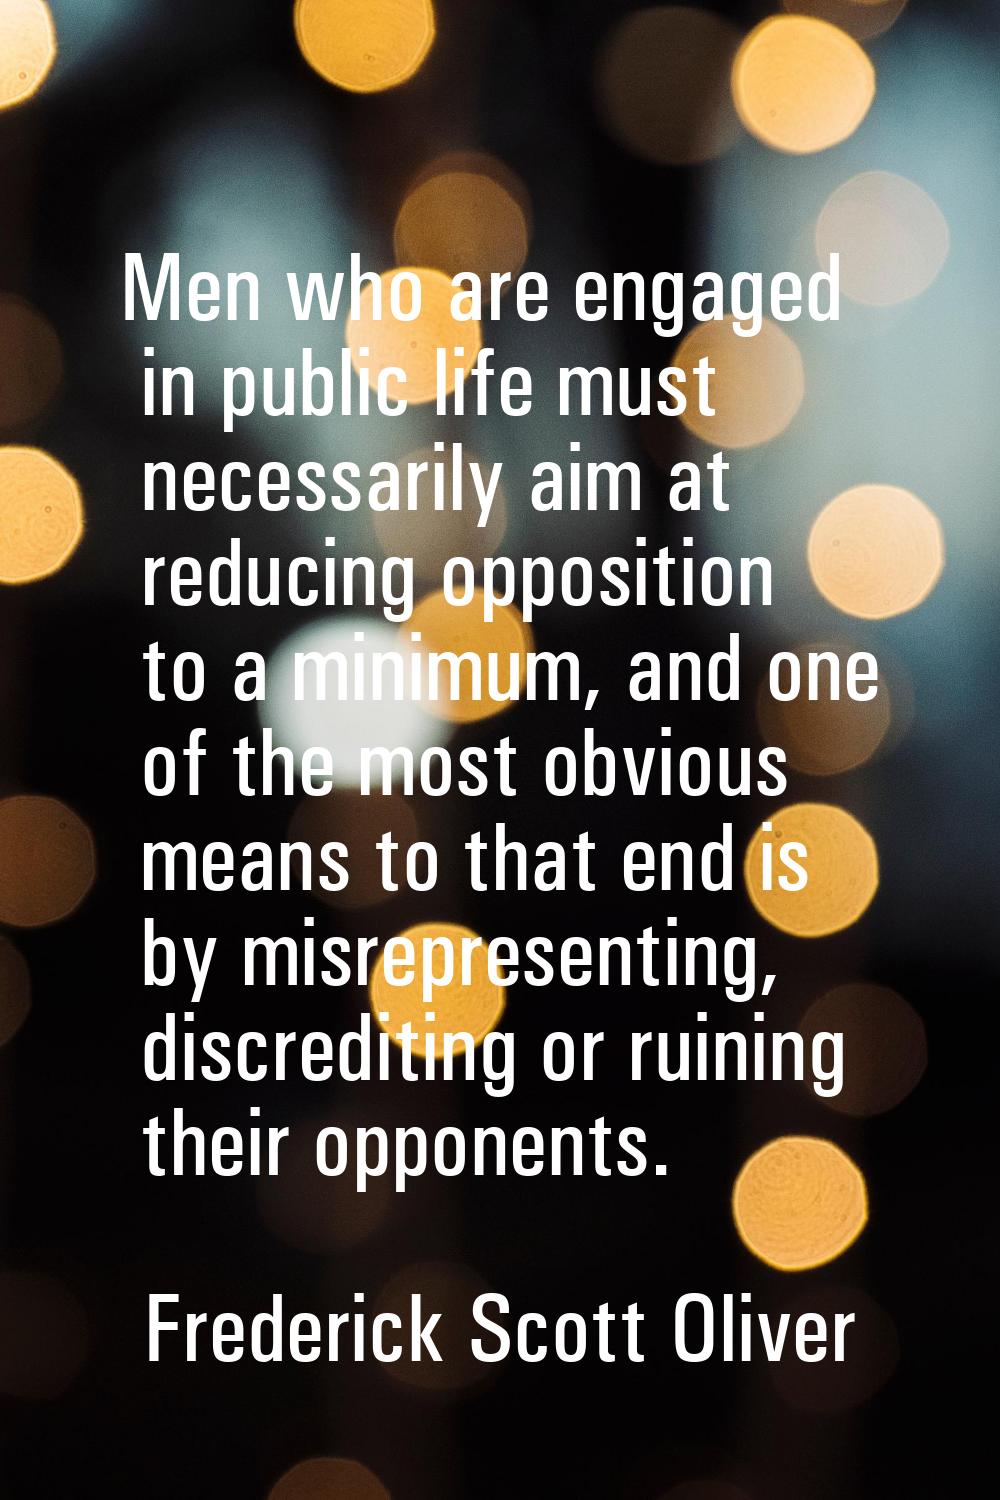 Men who are engaged in public life must necessarily aim at reducing opposition to a minimum, and on